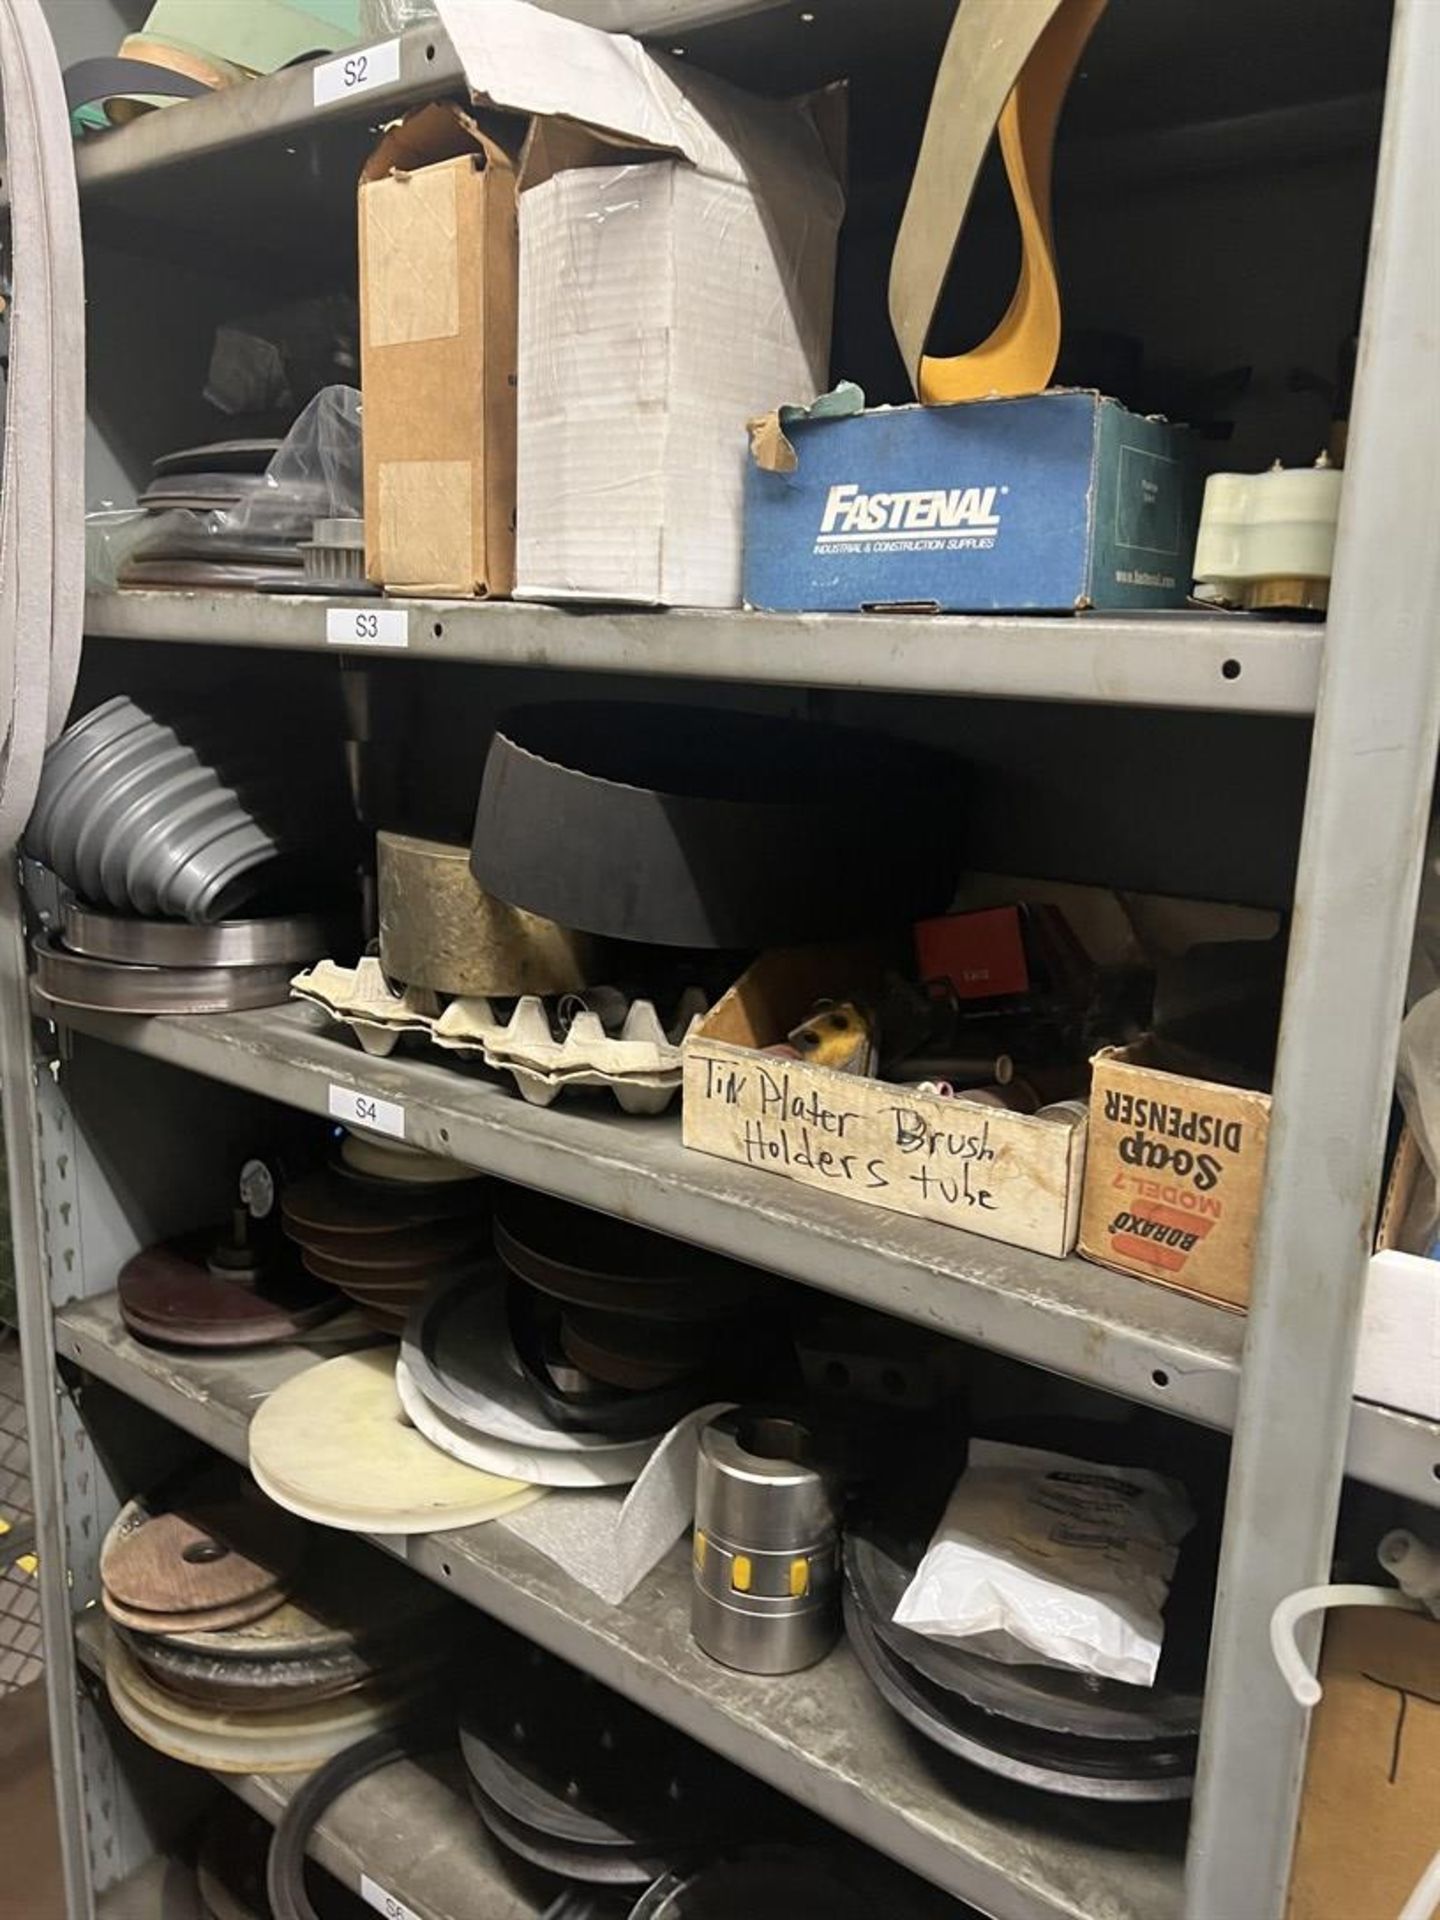 Maintenance Crib- Row of Shop Shelving w/ Contents Including Pulleys, Sleeves, Seals, Air wipes, - Image 20 of 22